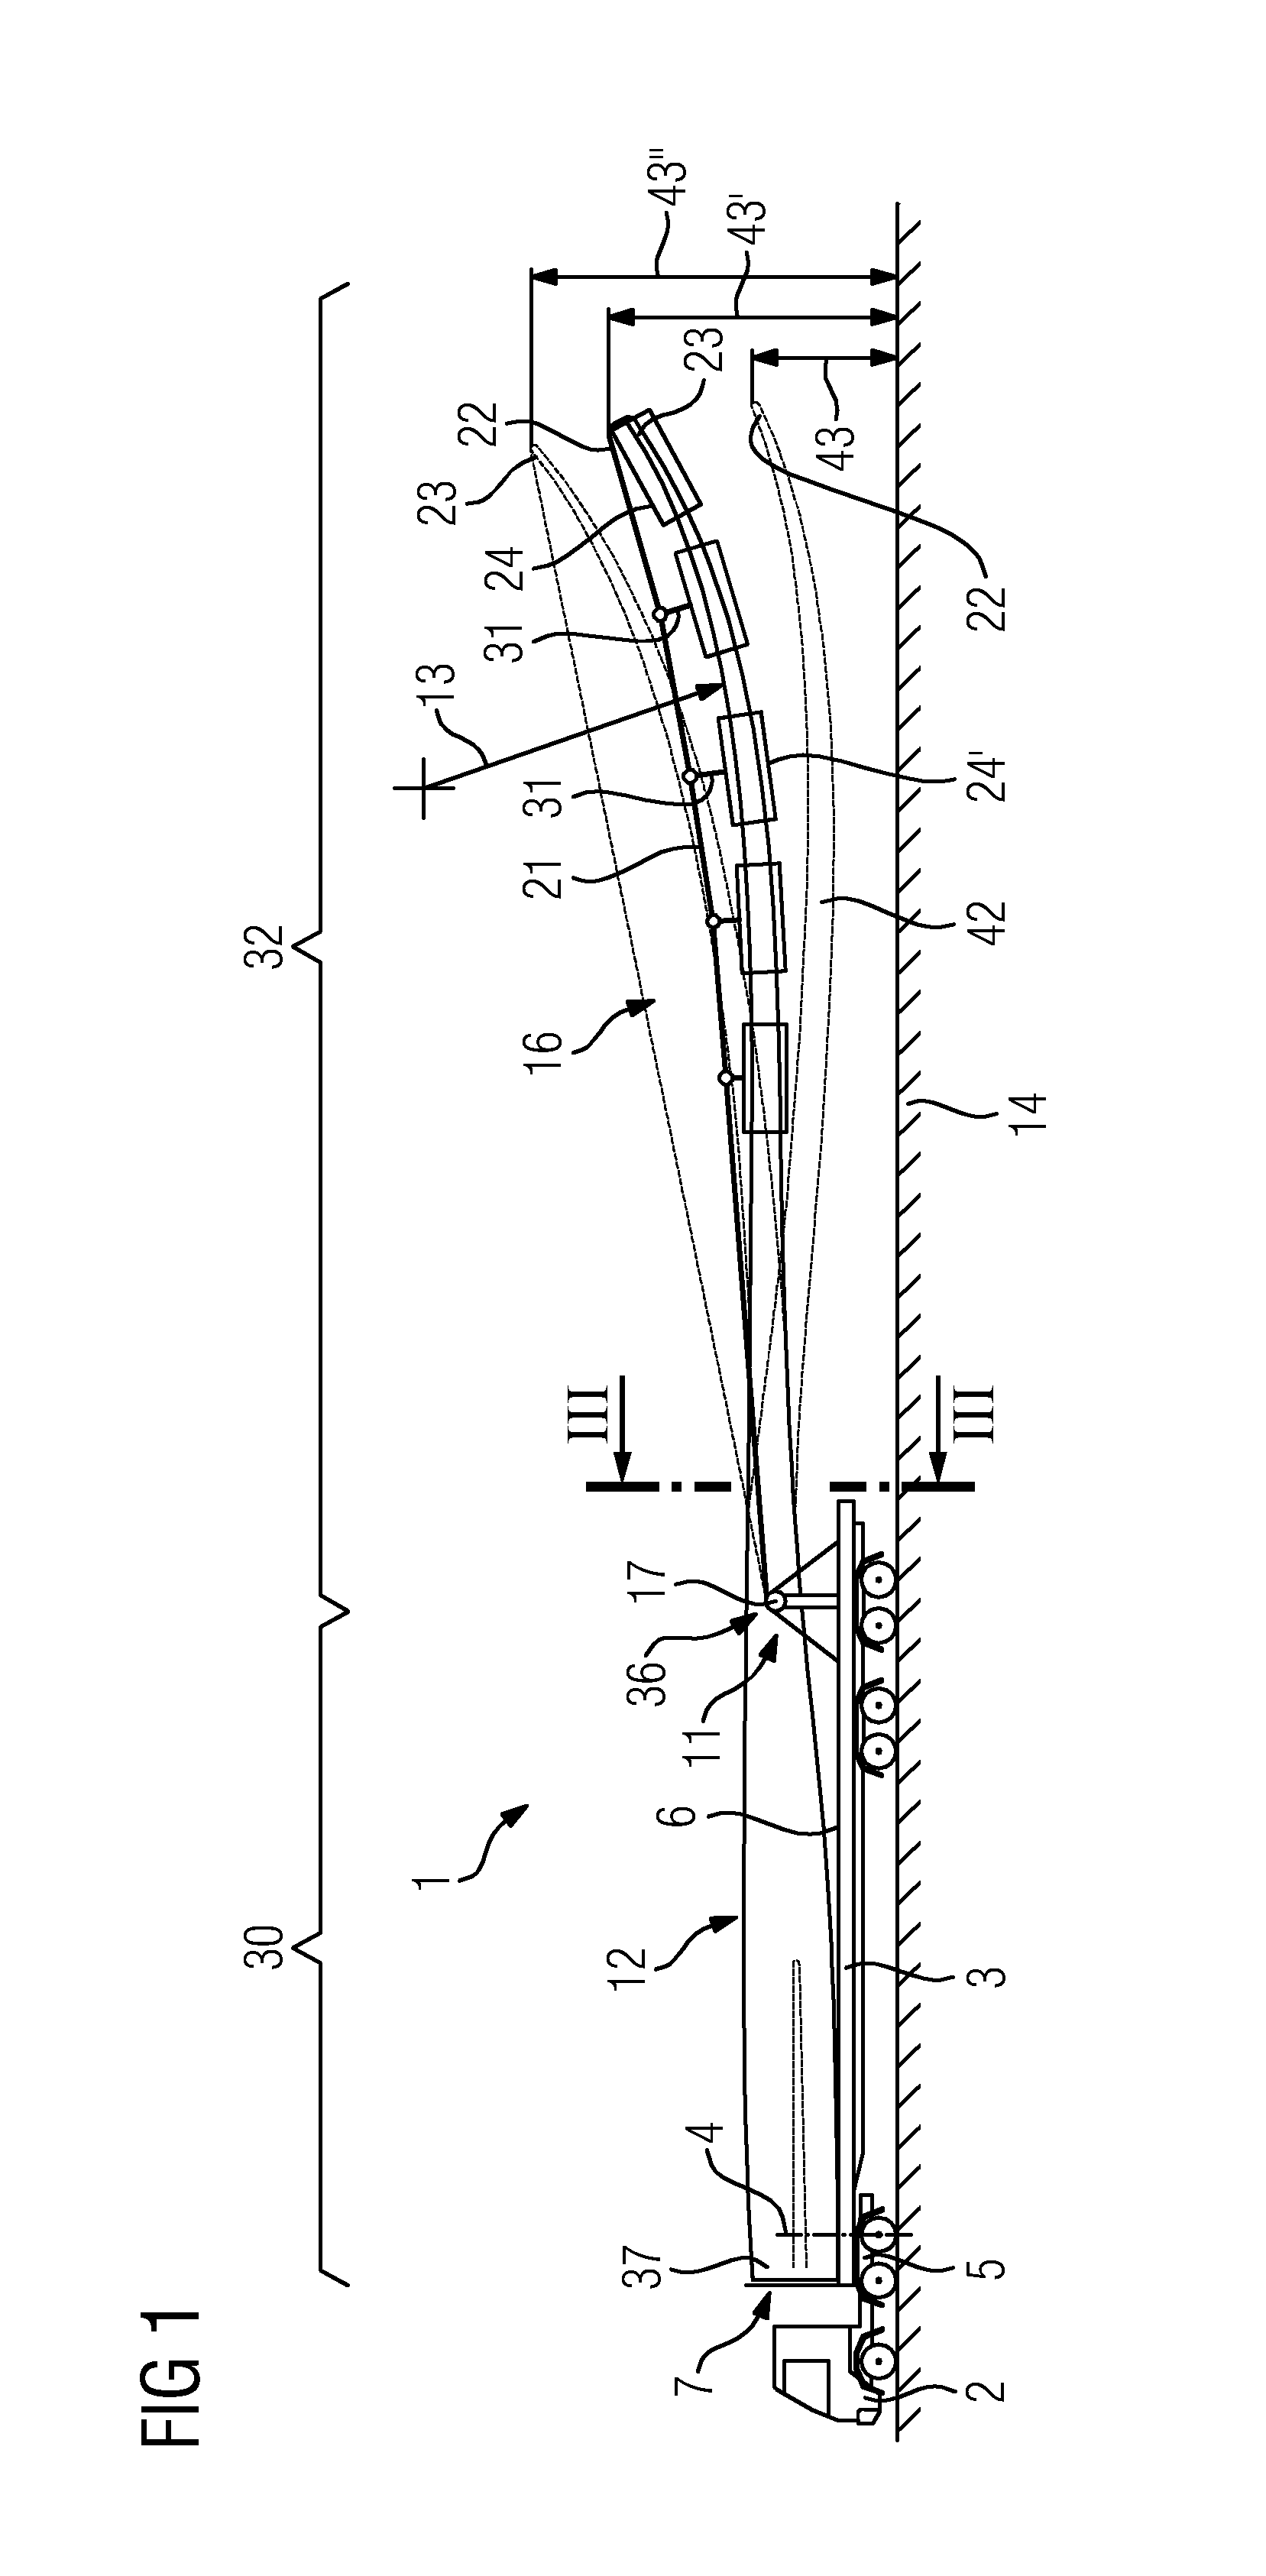 Transport system for a wind turbine blade